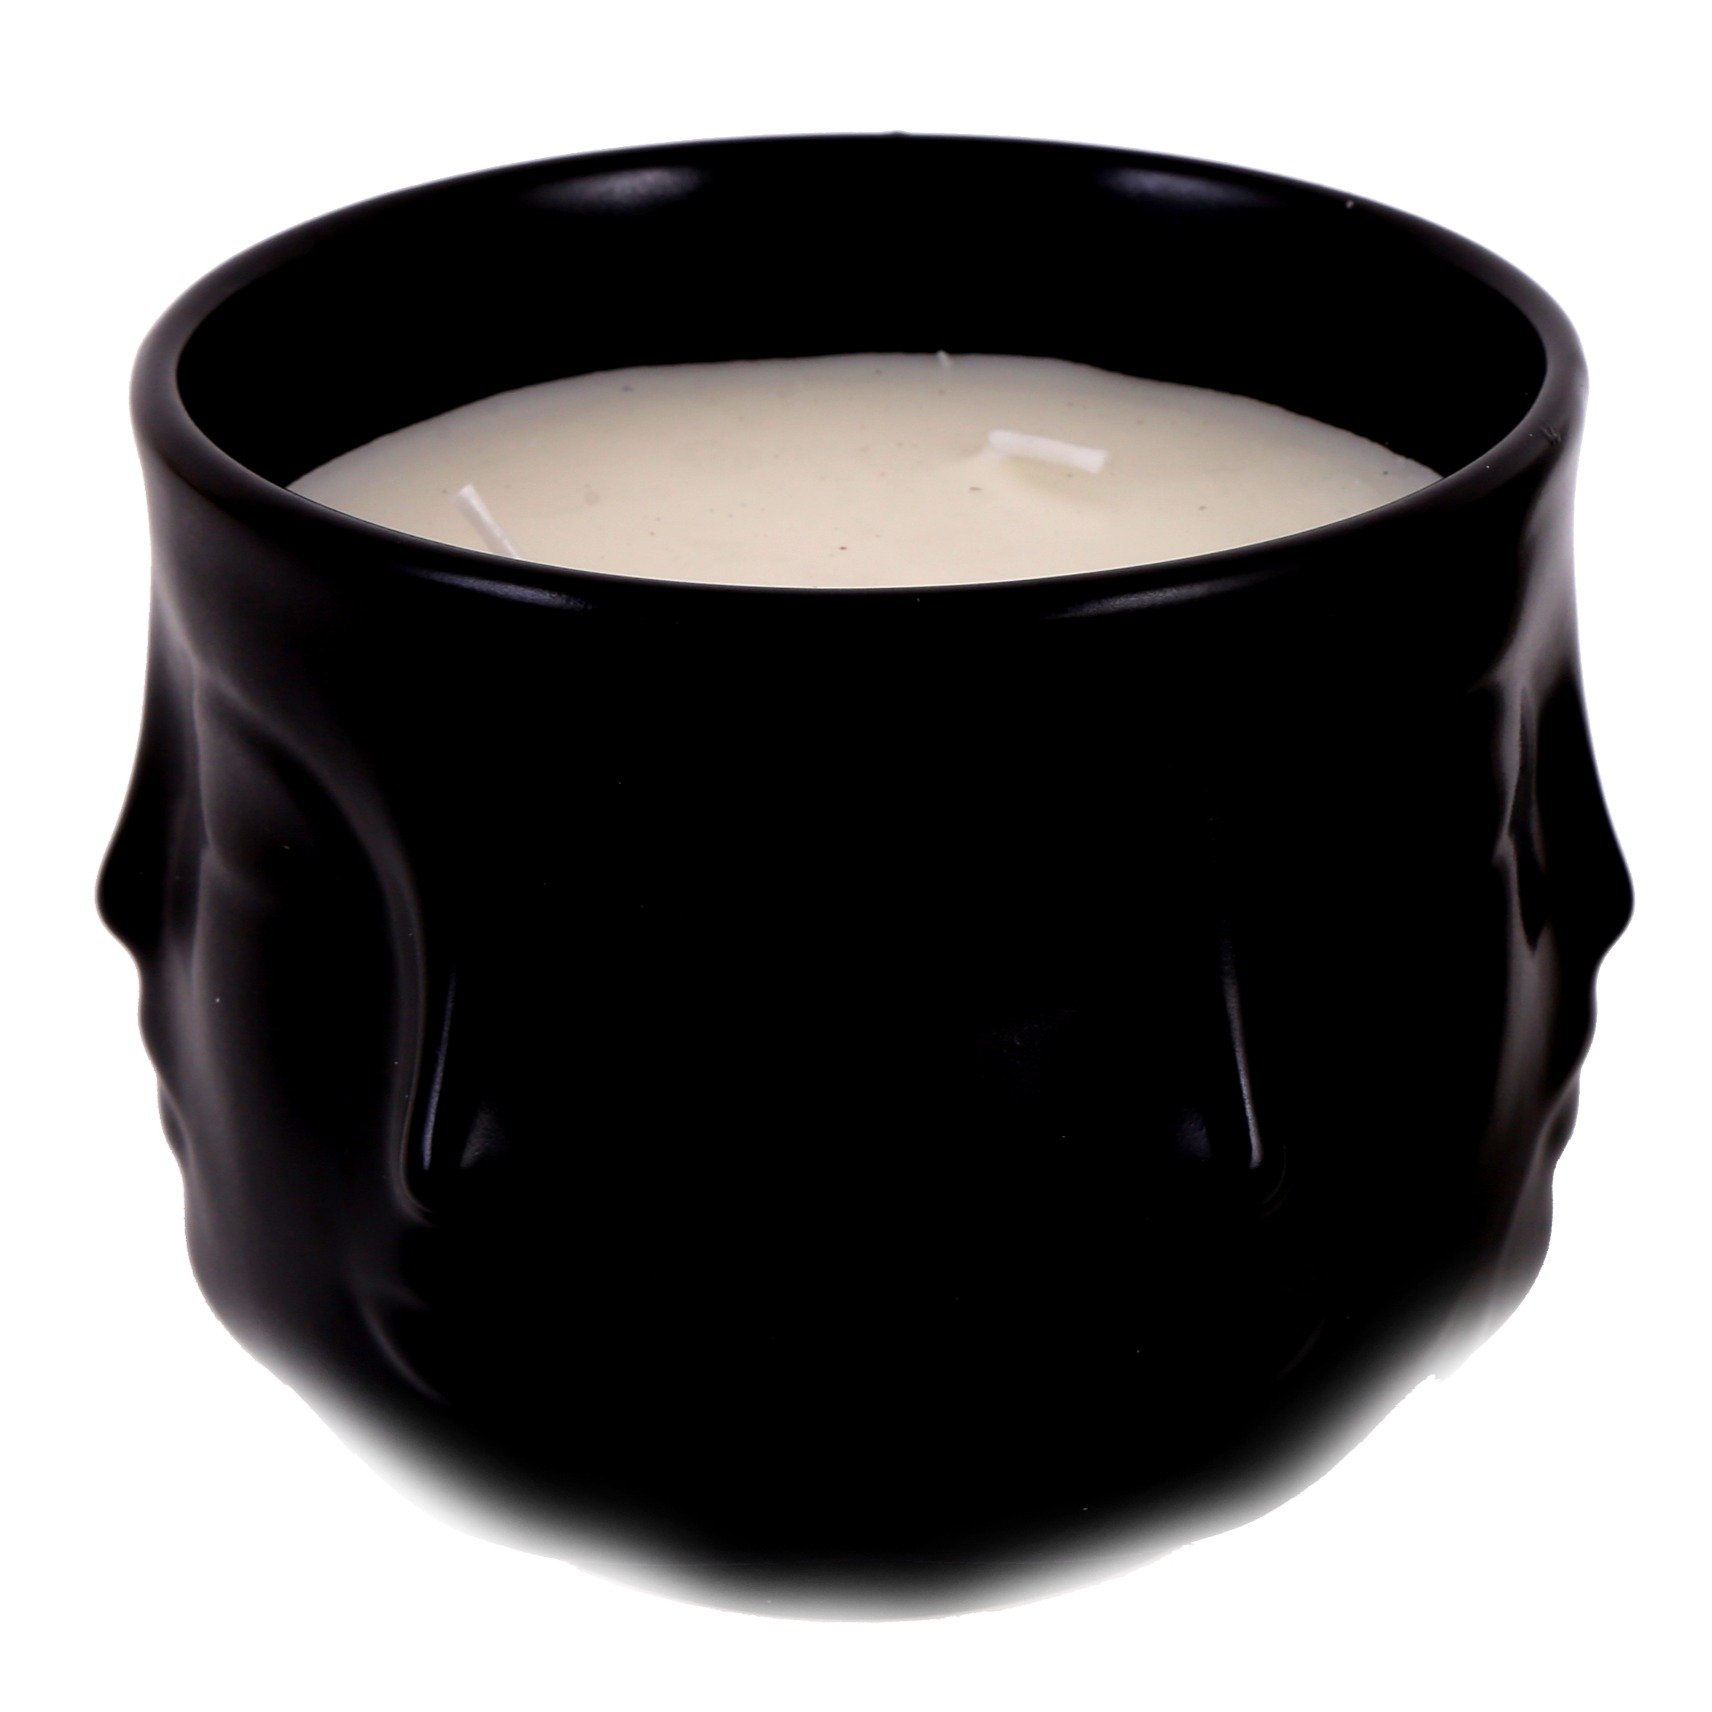 &Quirky Pagan Many Faces Candle Pot : Black or White